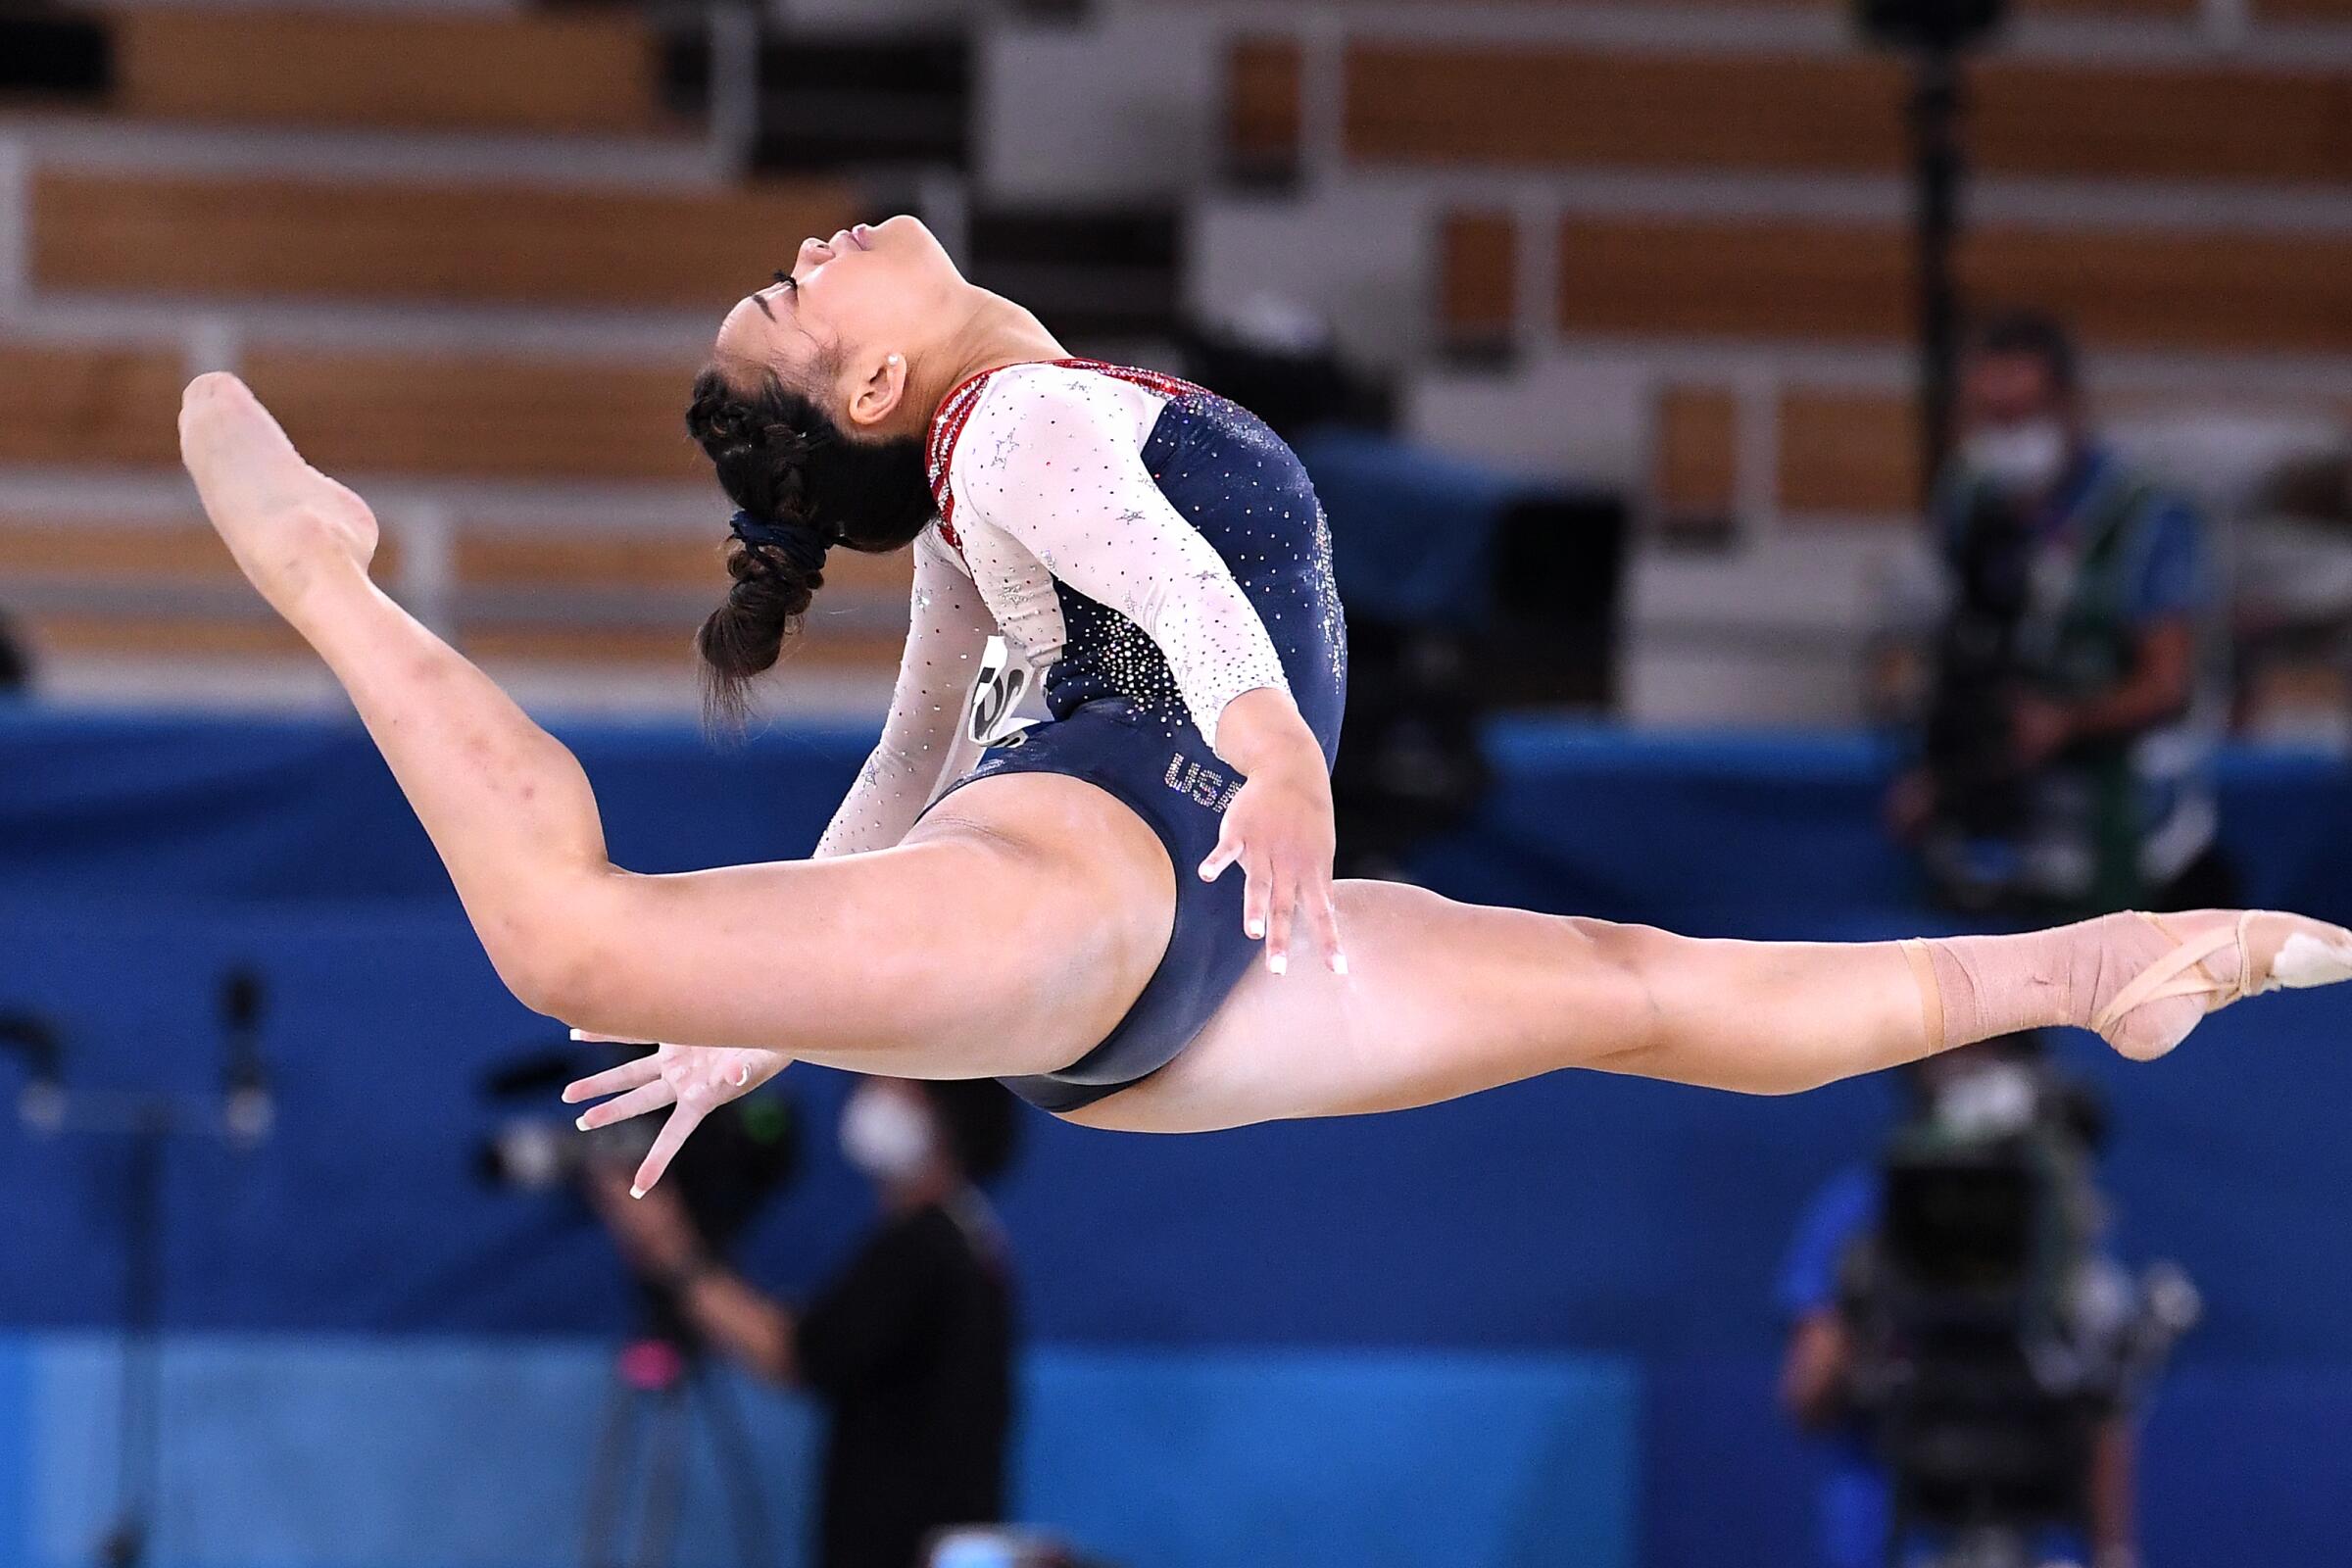 U.S. gymnast Suni Lee jumps into the air during the all-around competition.